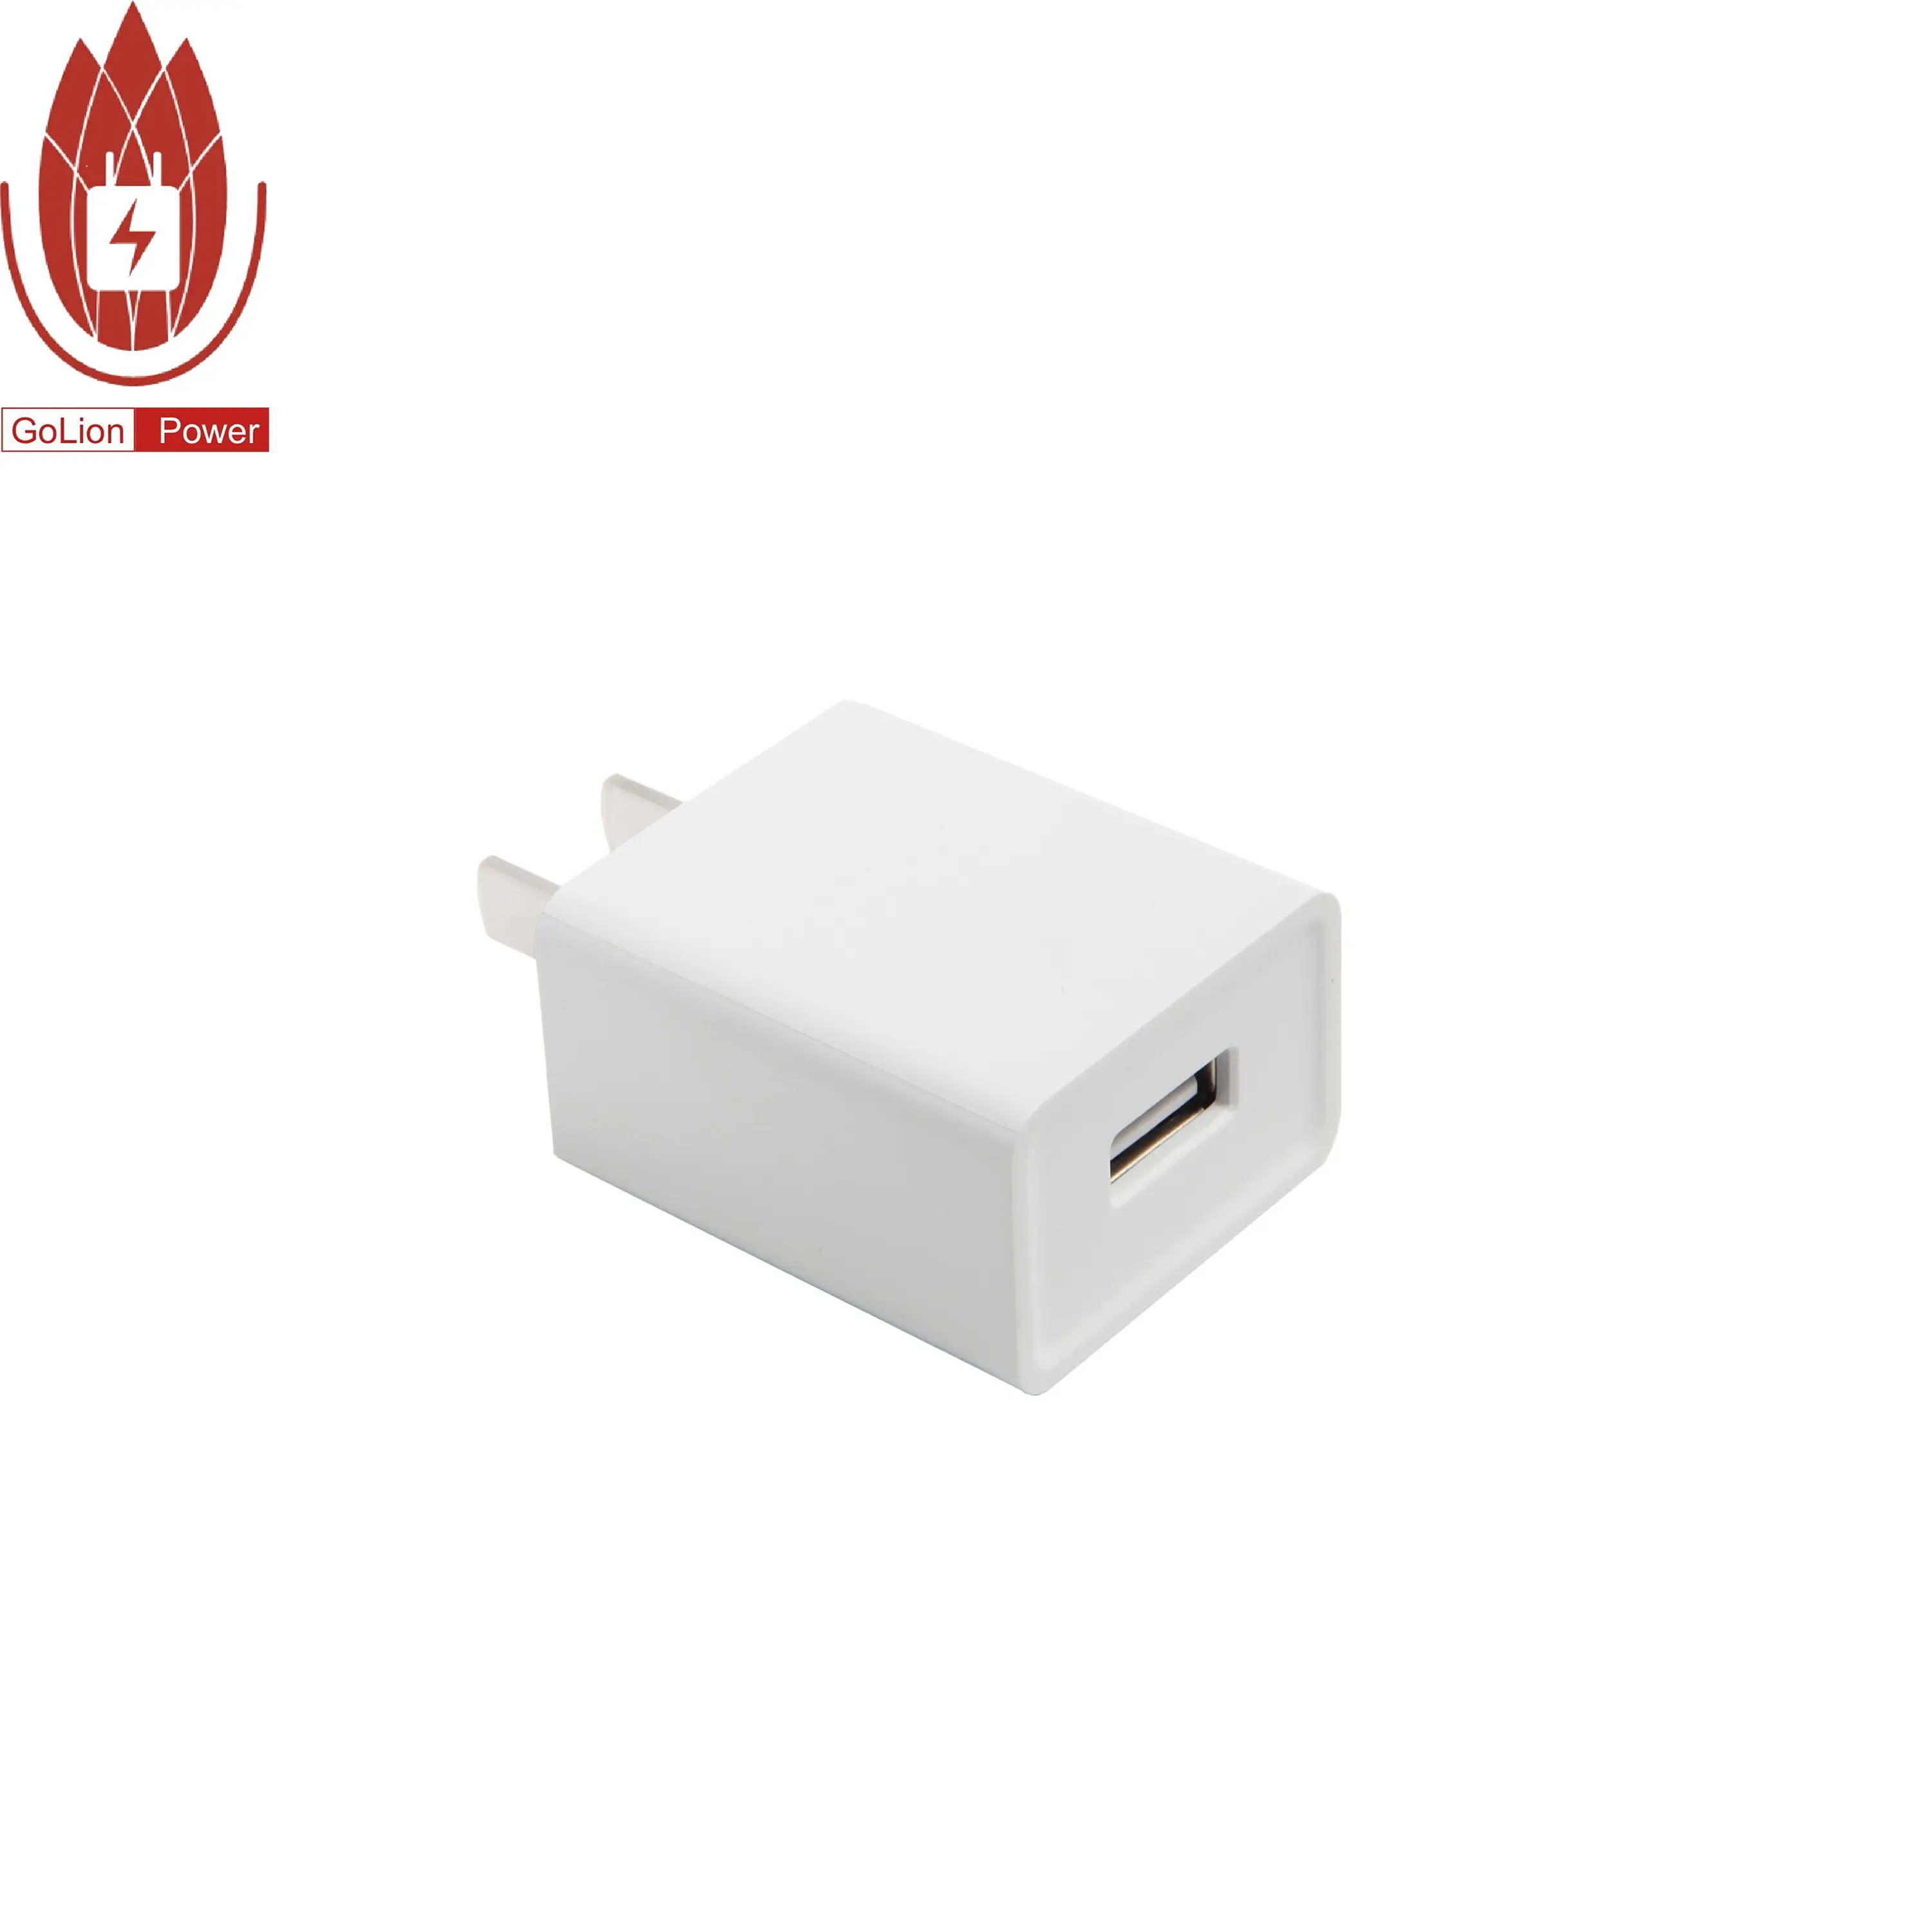 Wholesale Price Usb Cell Nokia Mobile Phone Charger 5V 1A 5V1A With FCC UL CE RoHS Certificate